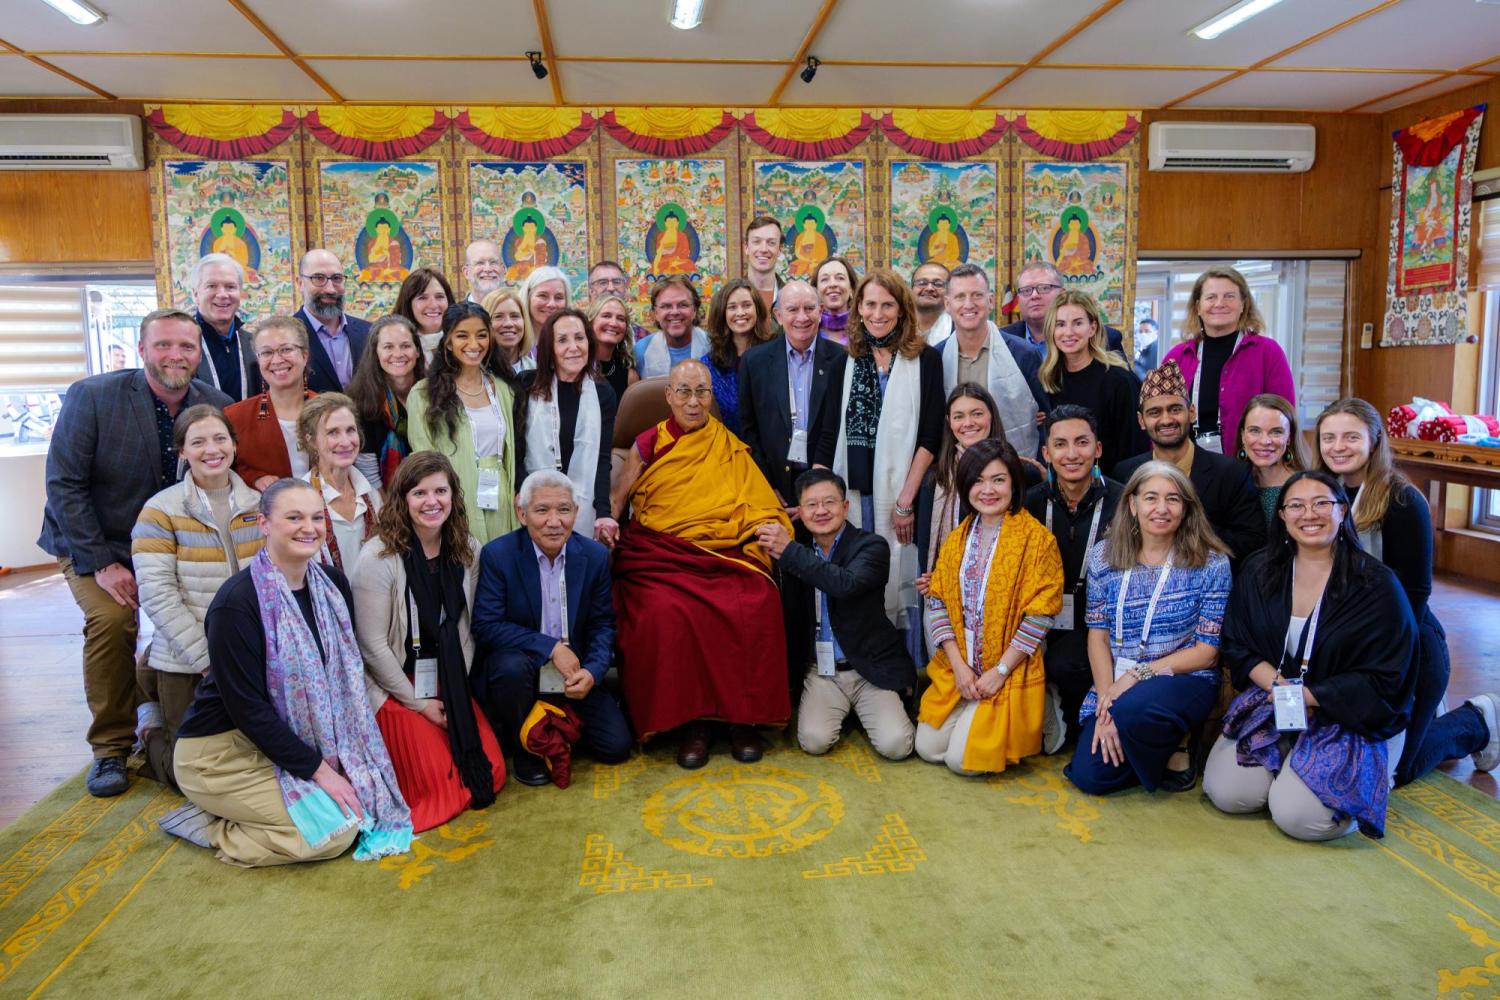 Group photo of college students and school representatives with the Dalai Lama